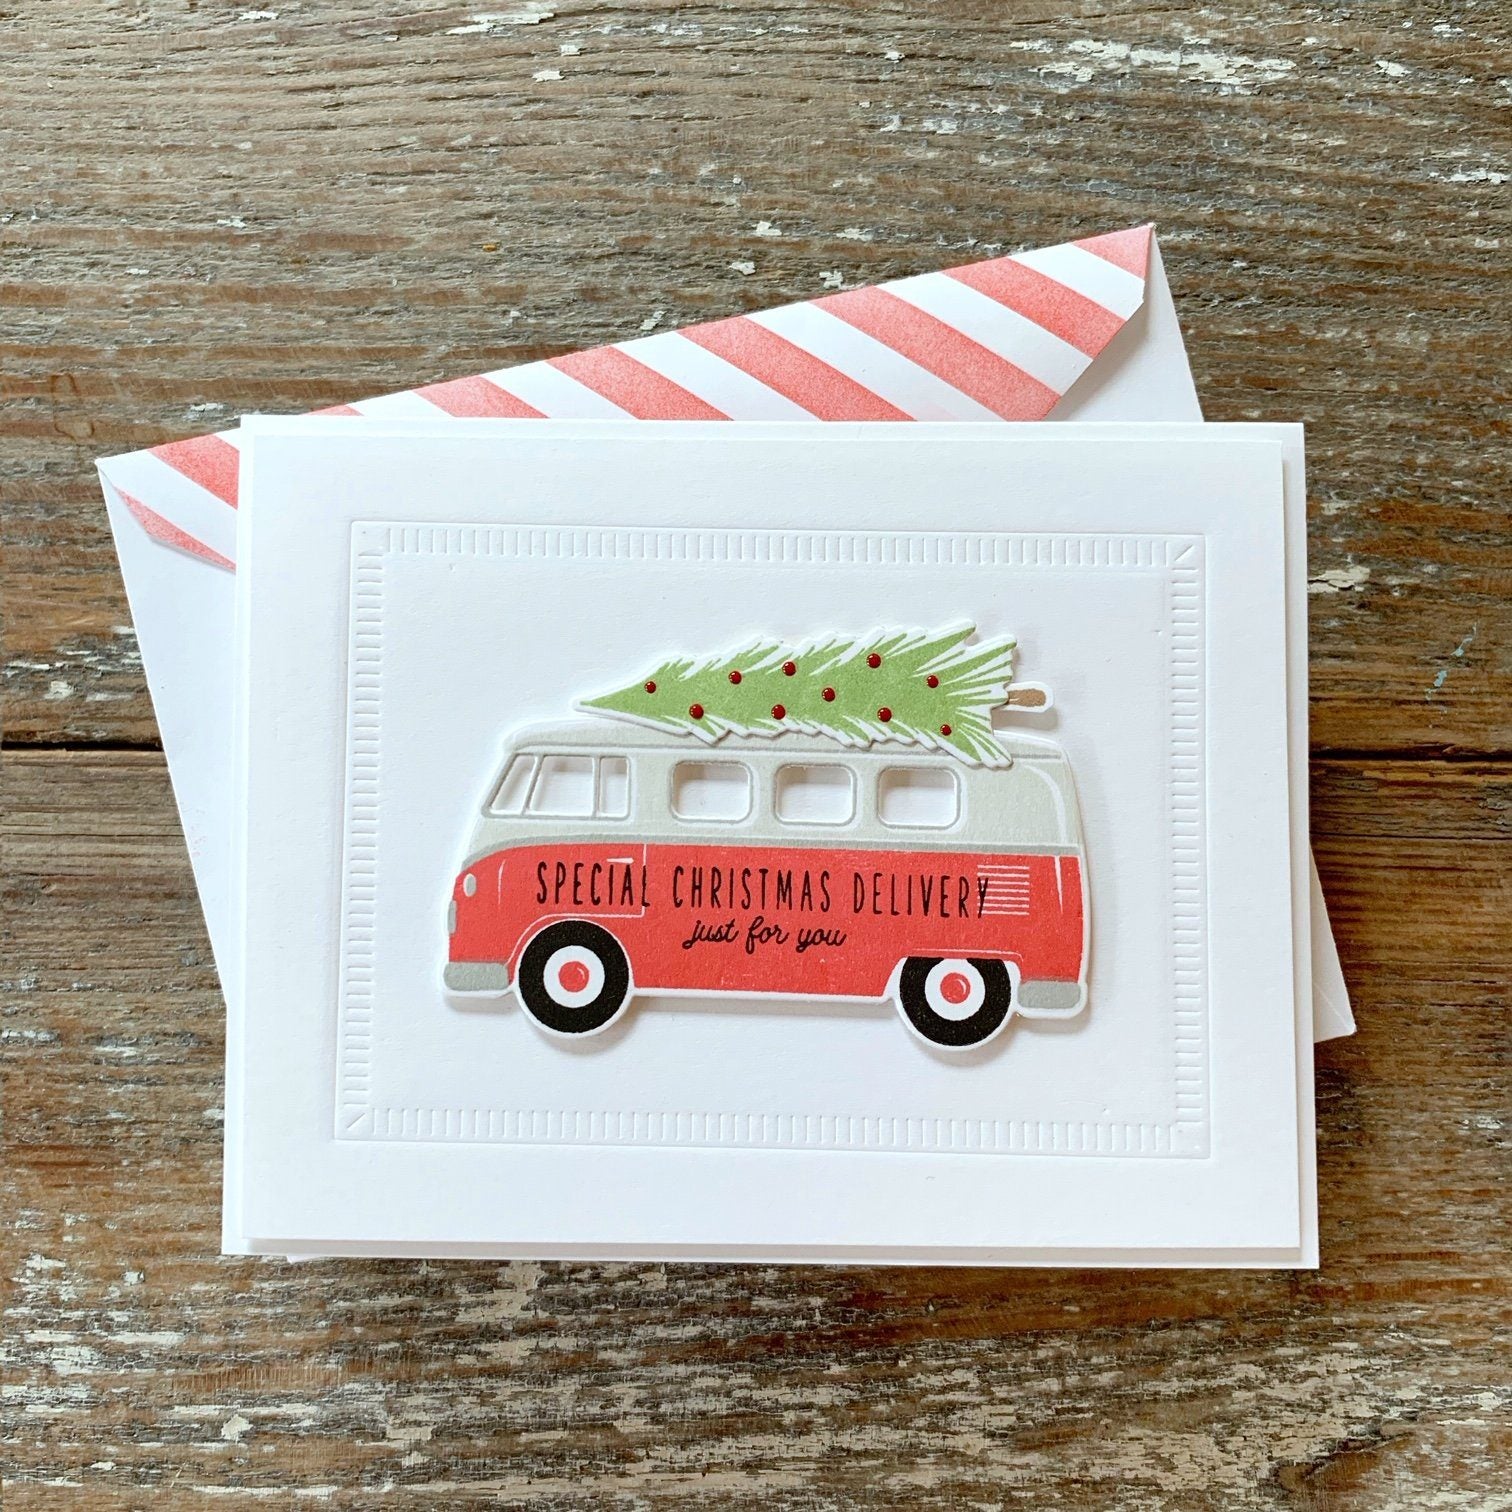 Christmas Care-A-Van Stamp Set – The Greetery